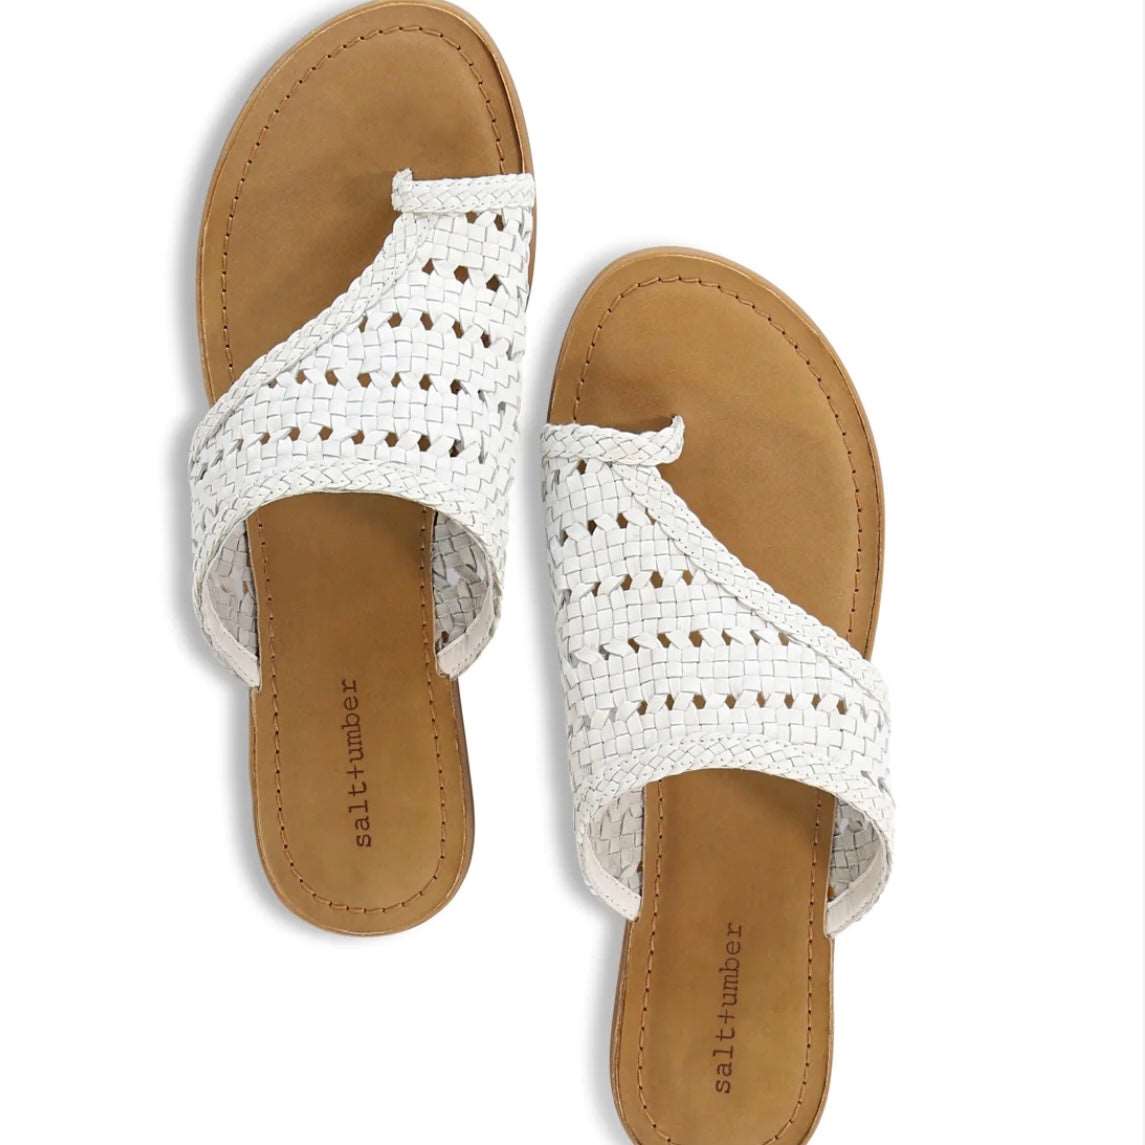 Athena Salt + Umber Sandals By Salt + Umber in White Size 9 | Crochet shoes,  Womens slippers, Sandals